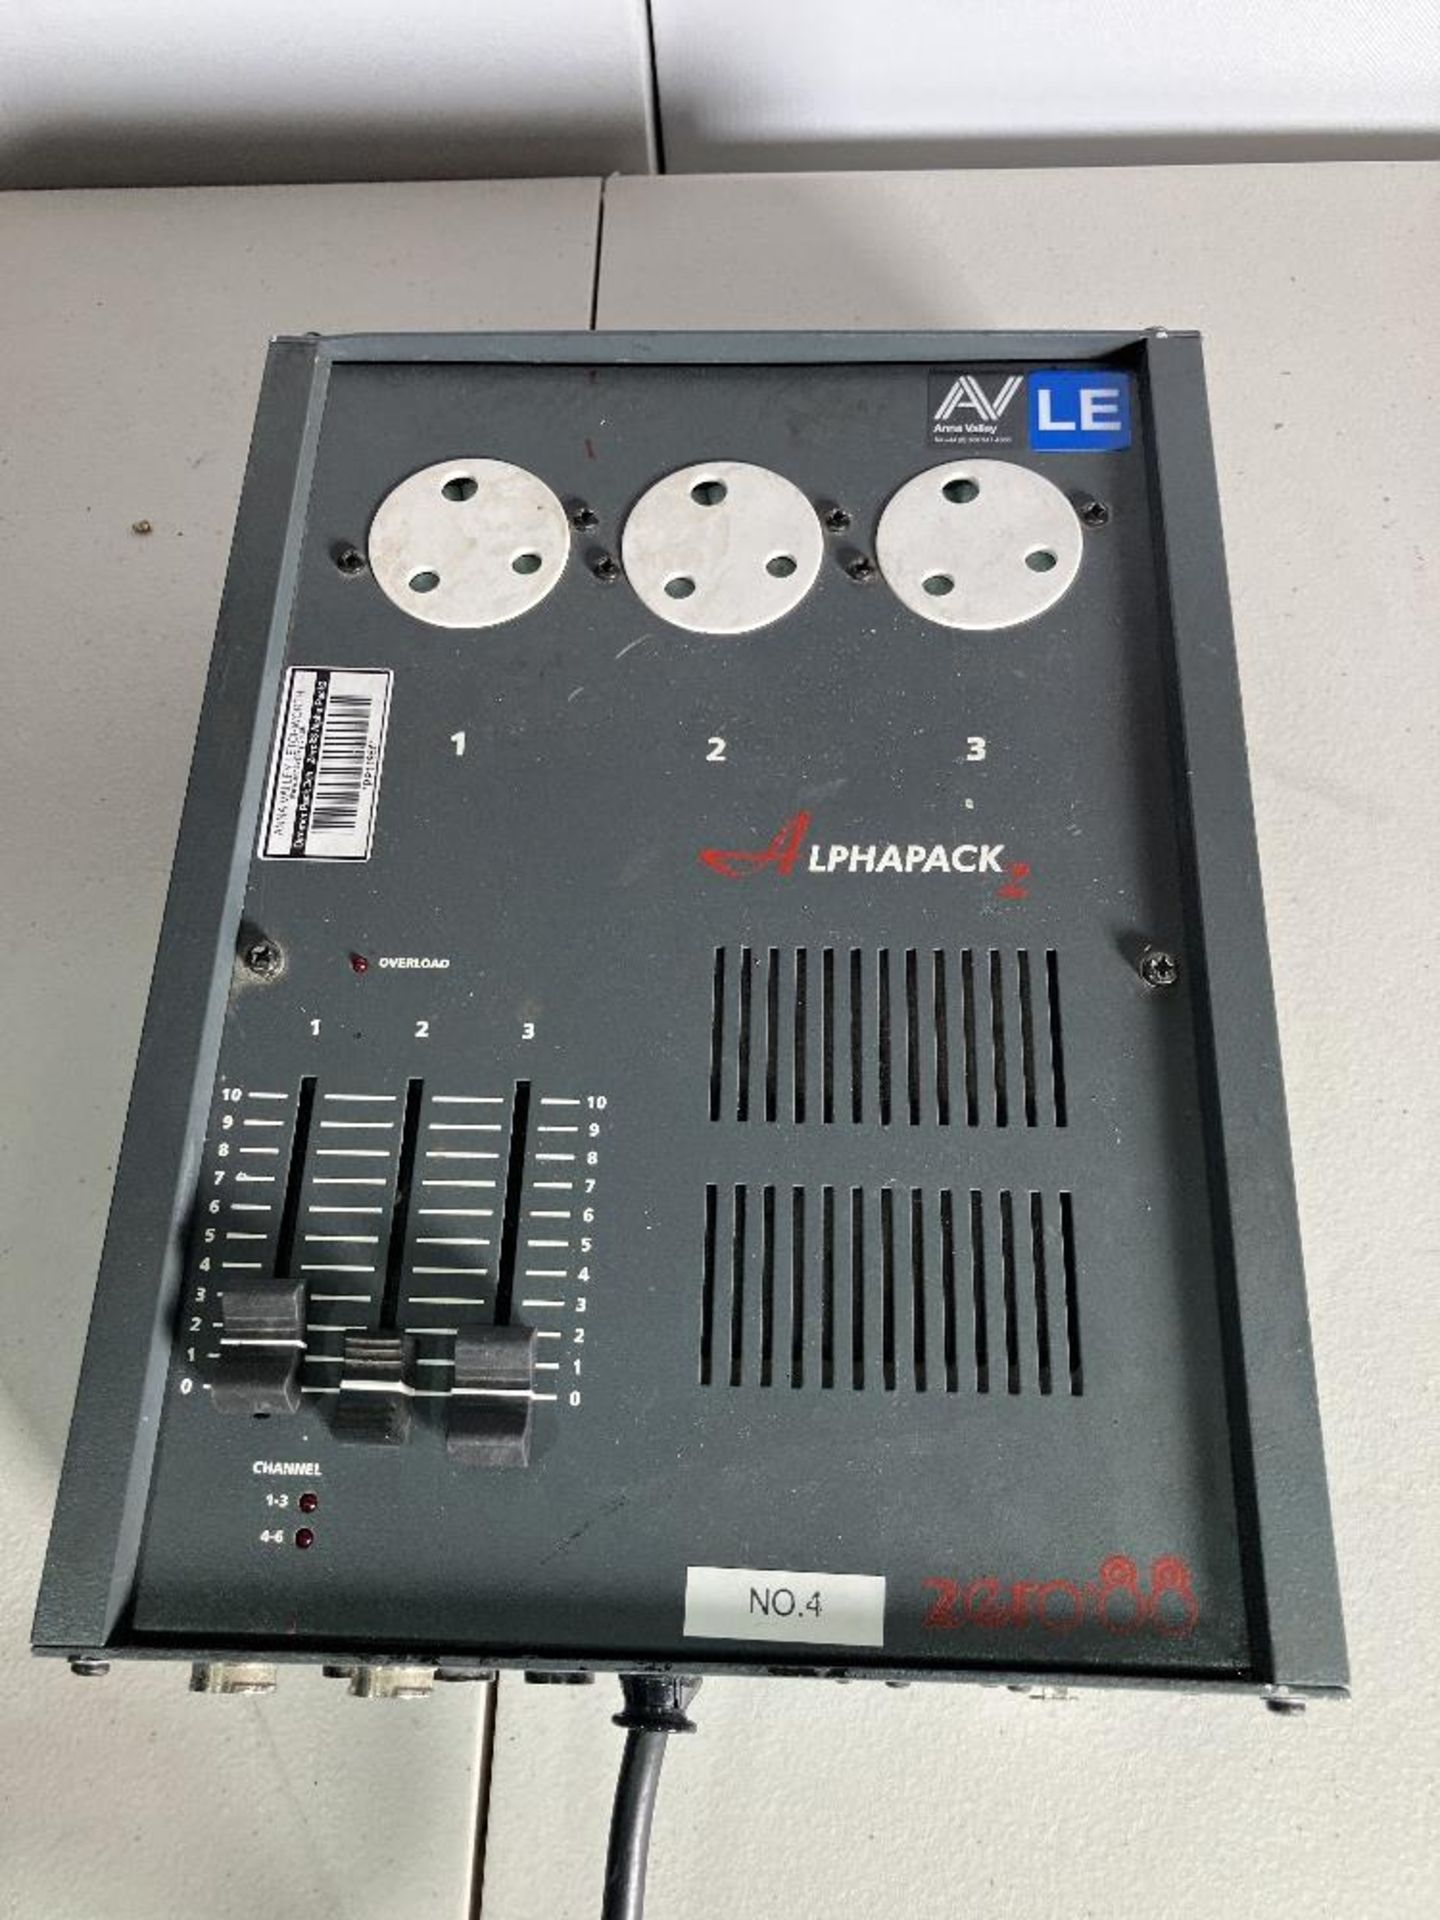 Zero88 Alpha Pack2 Dimmer - Image 3 of 7